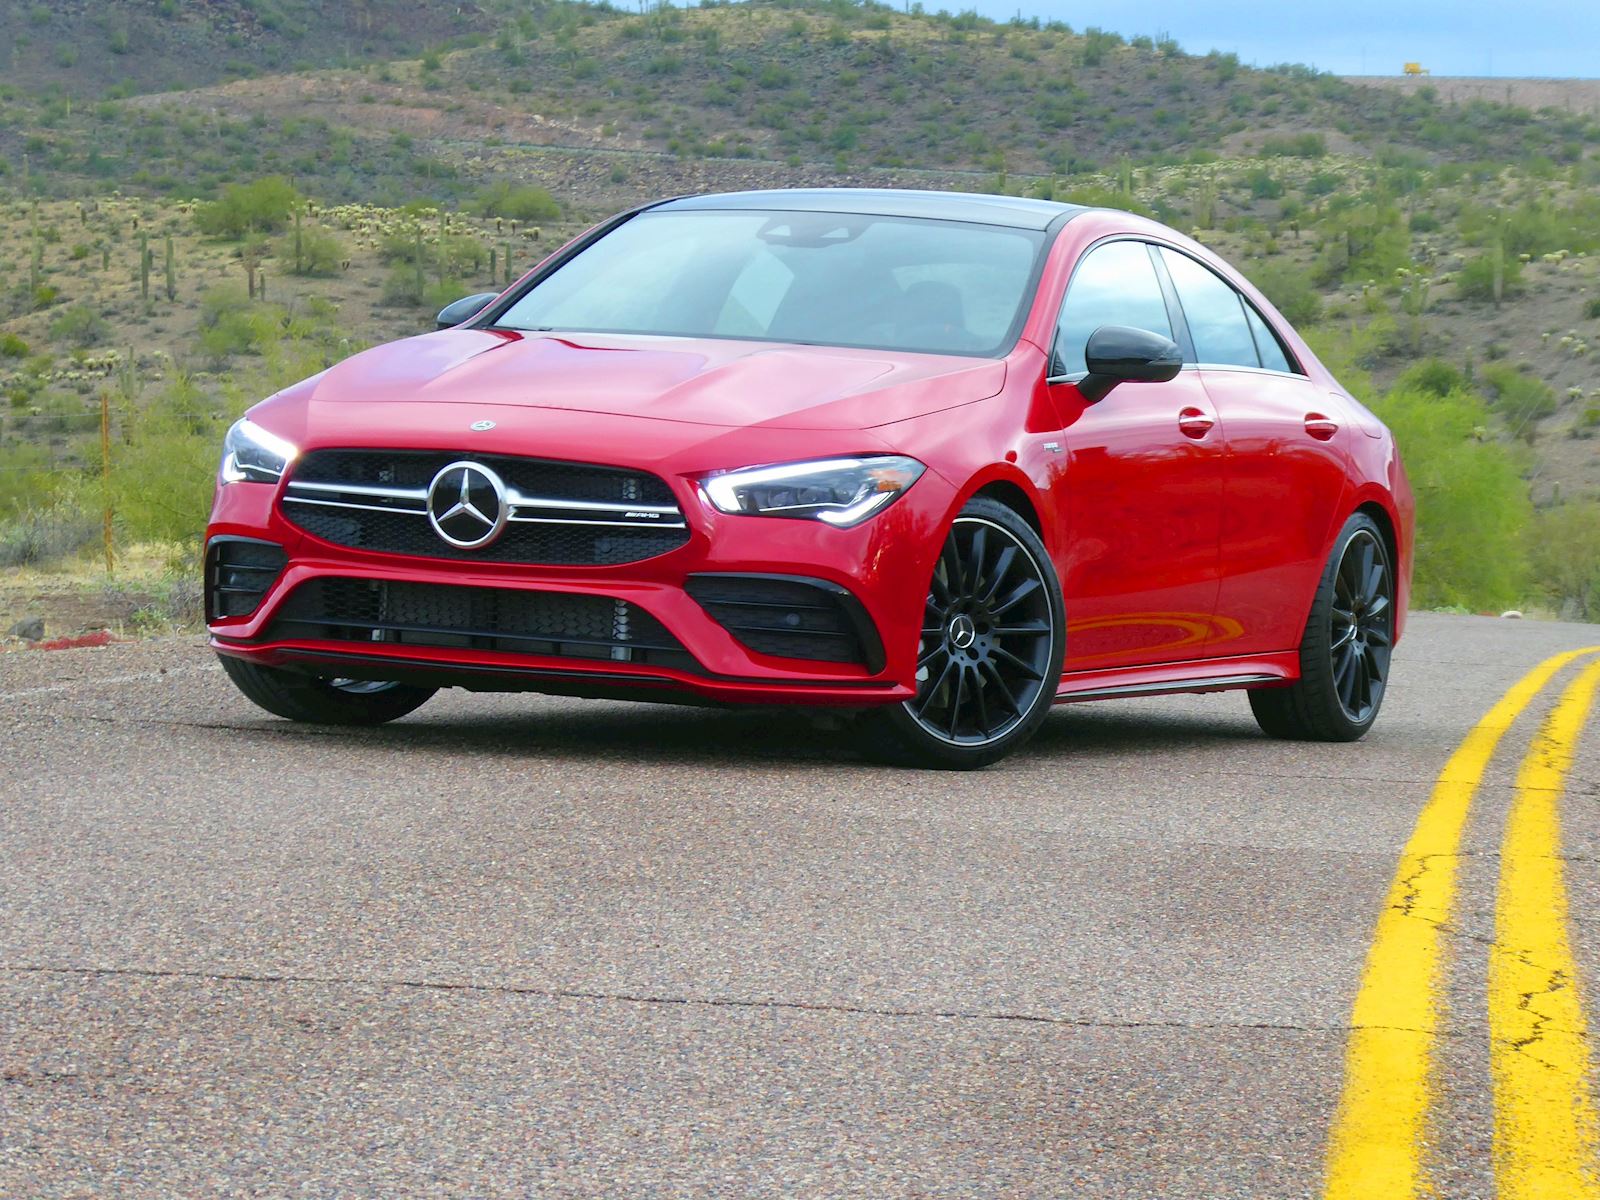 202020 Mercedes CLA 35 front view